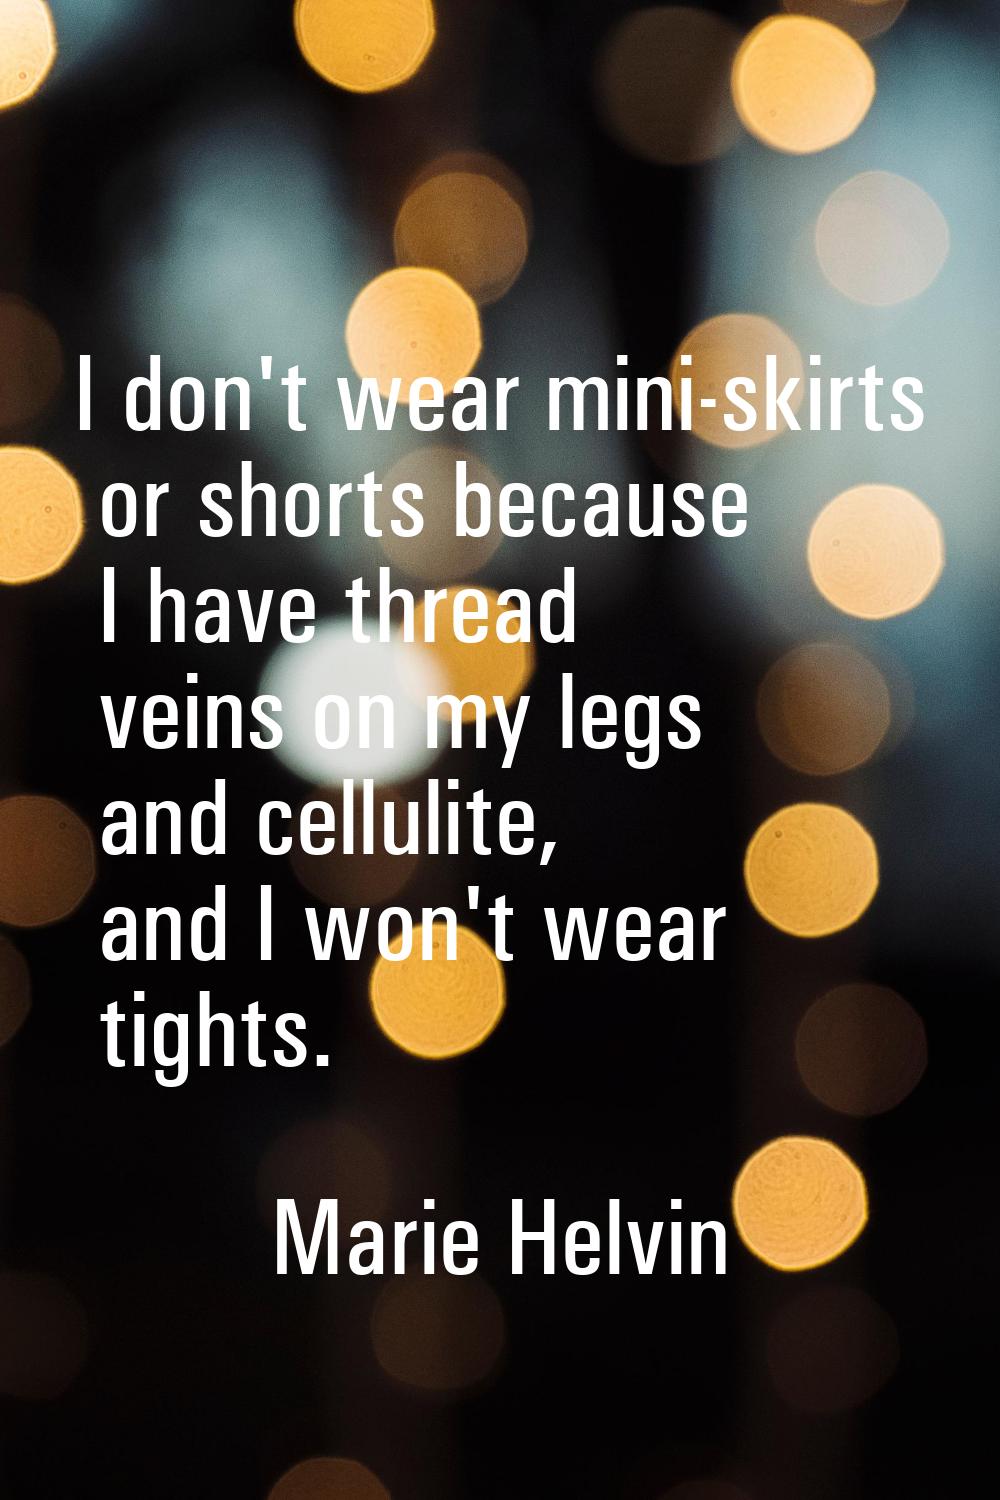 I don't wear mini-skirts or shorts because I have thread veins on my legs and cellulite, and I won'